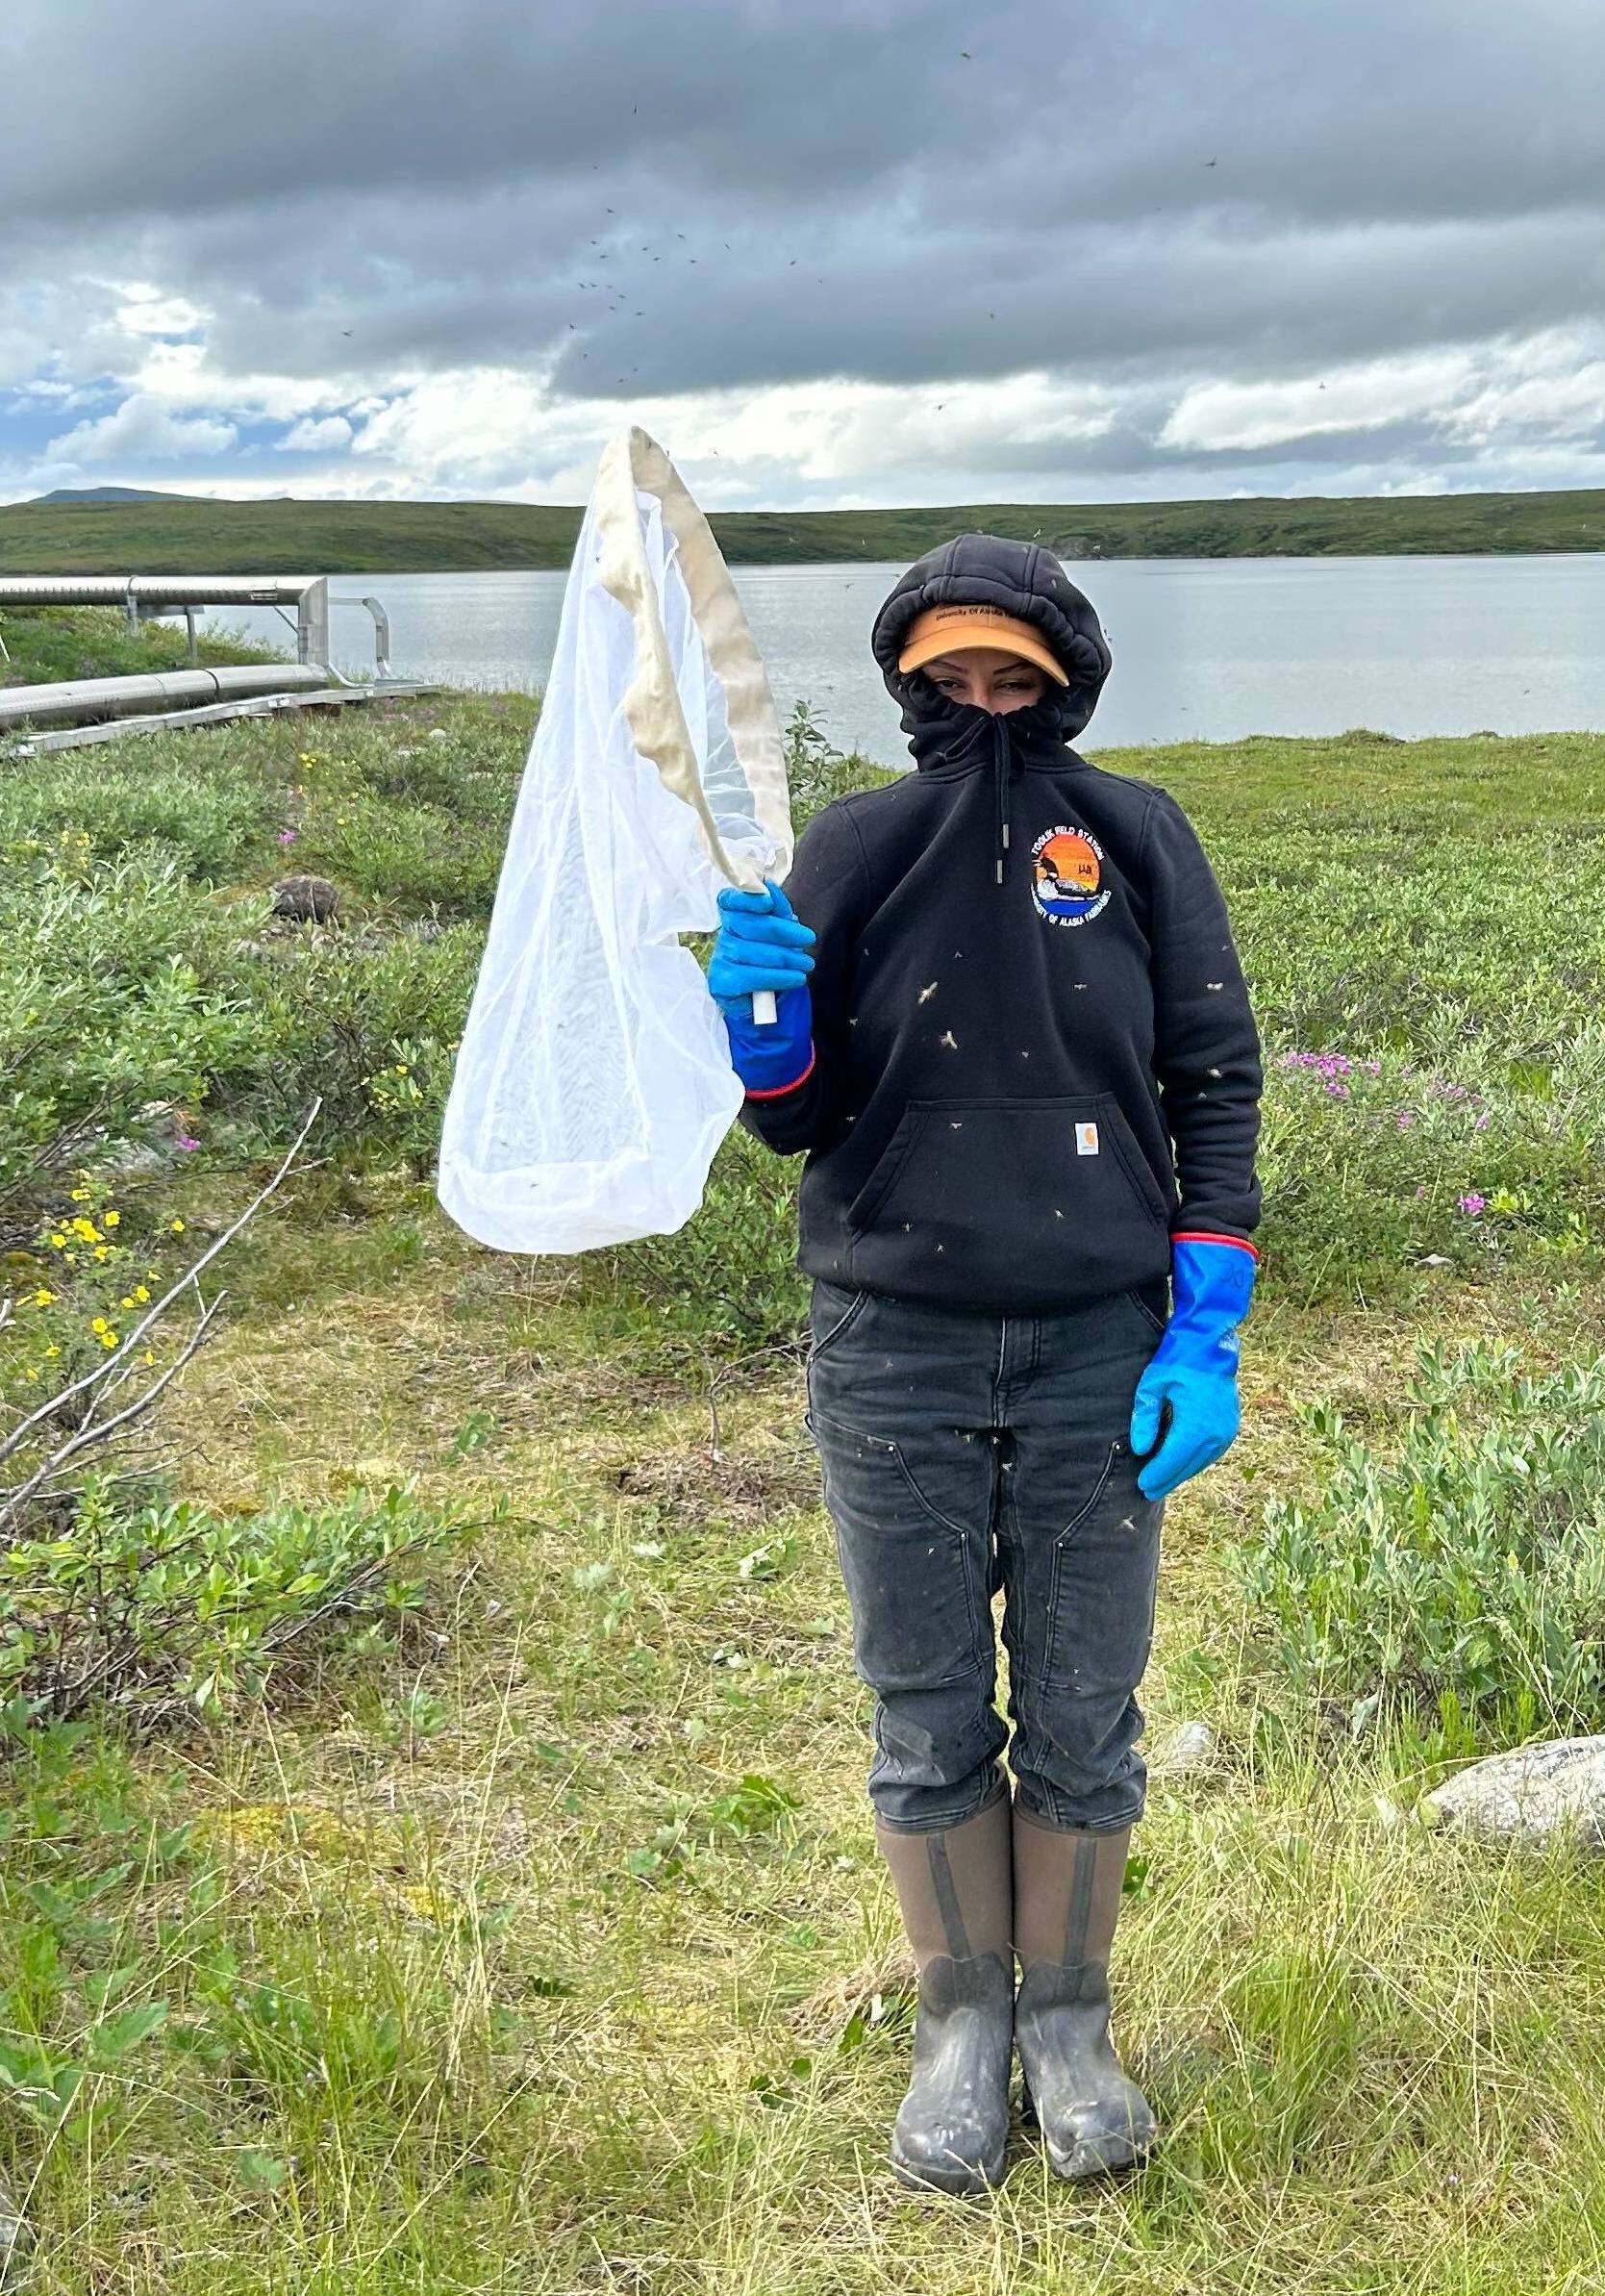 Photo by Toolik Field Station
Year-round technician and mosquito maven Mayra Meléndez González prepares to collect mosquitos near Toolik Field Station in 2023.